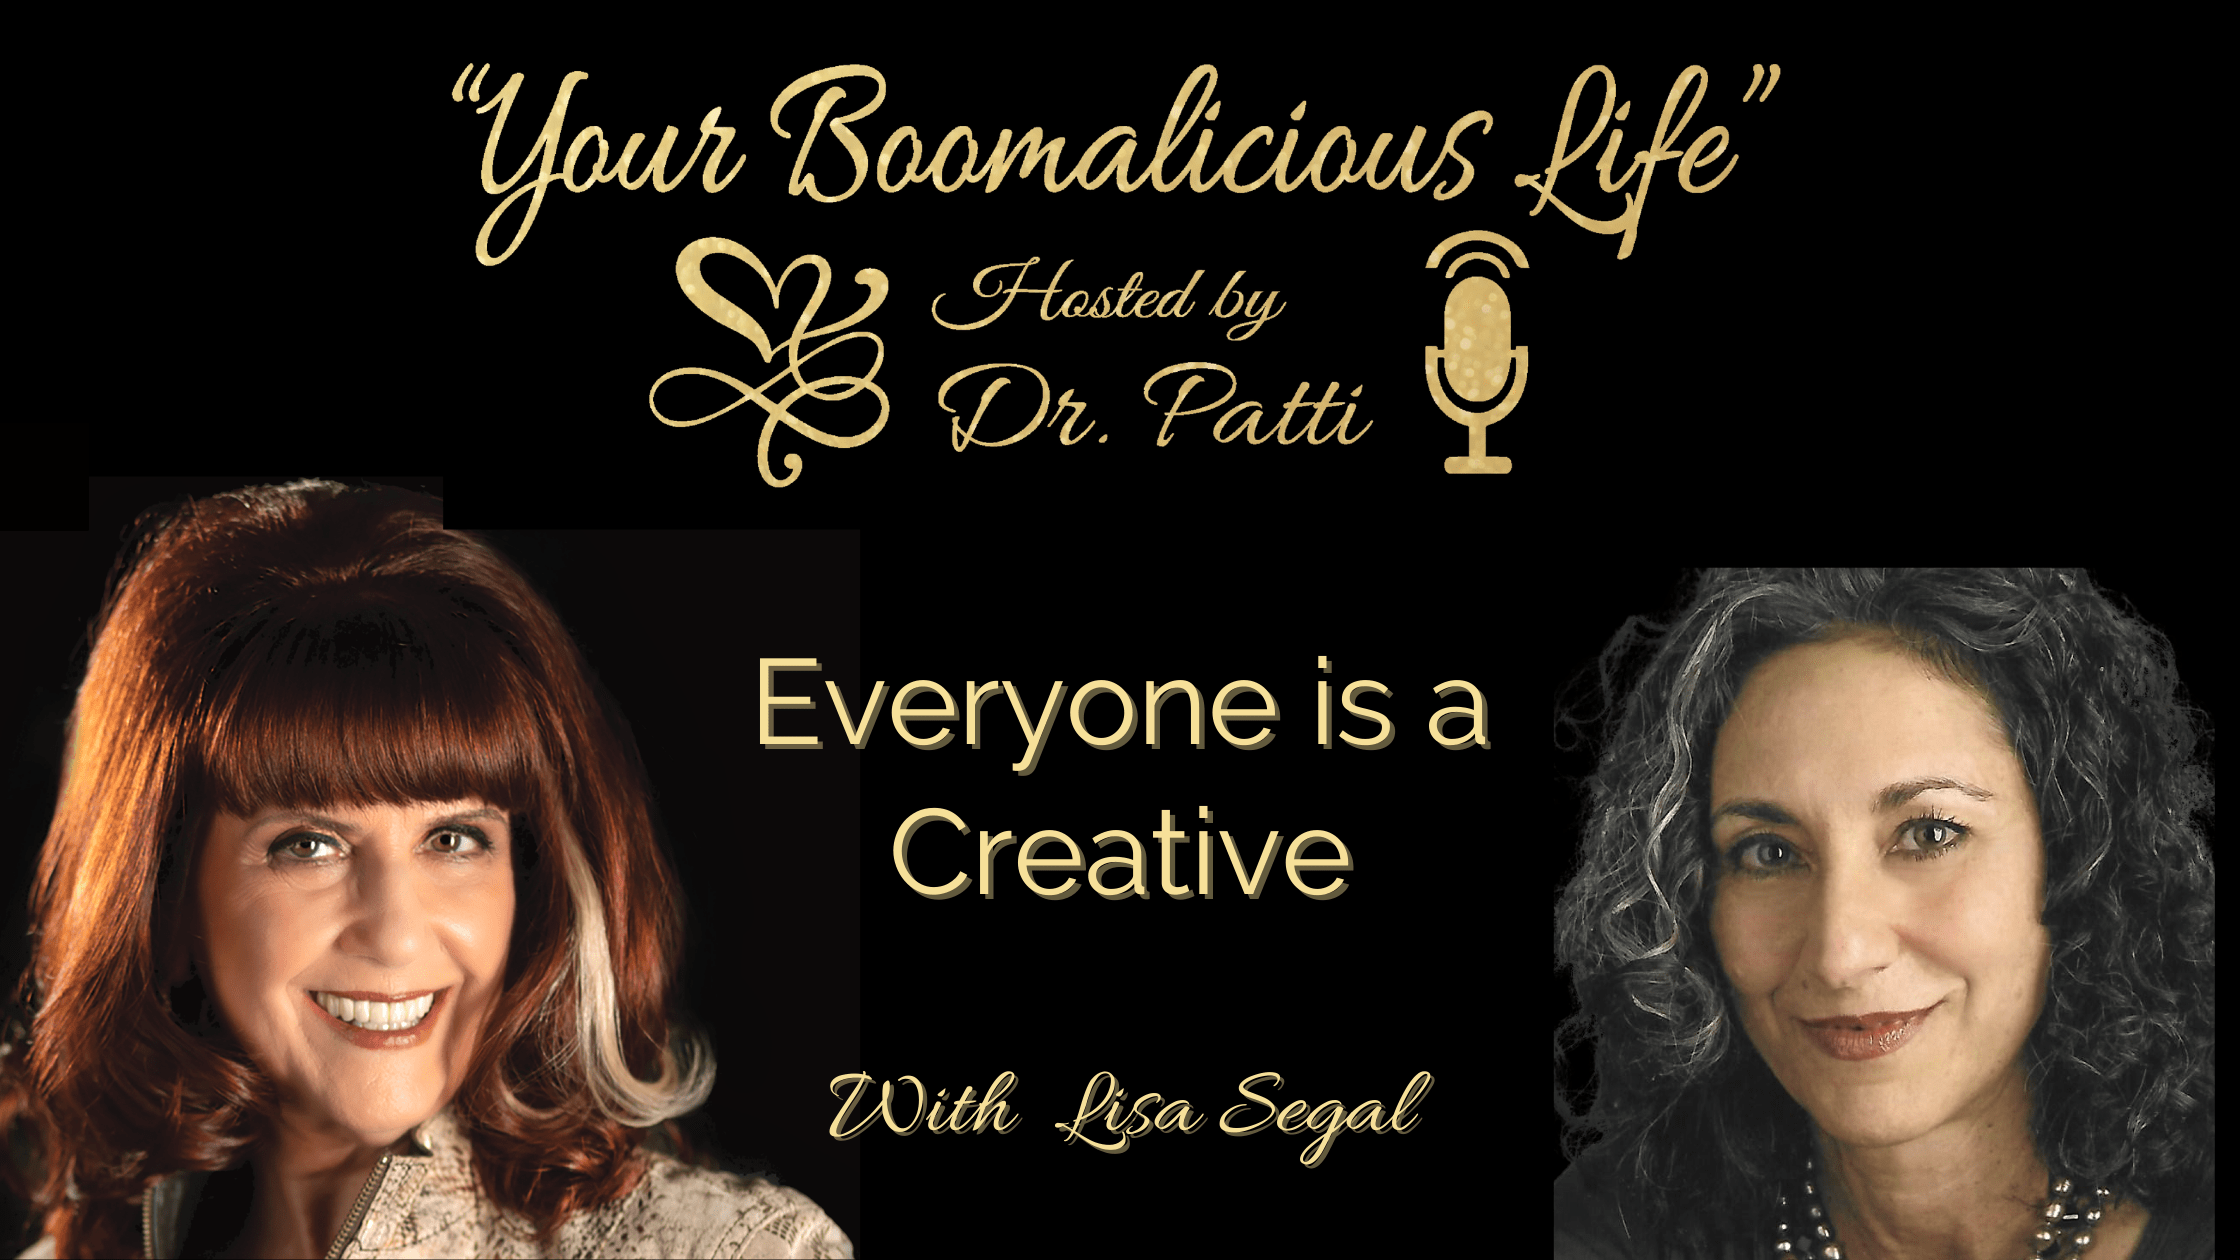 Episode 14: “Everyone is a Creative”